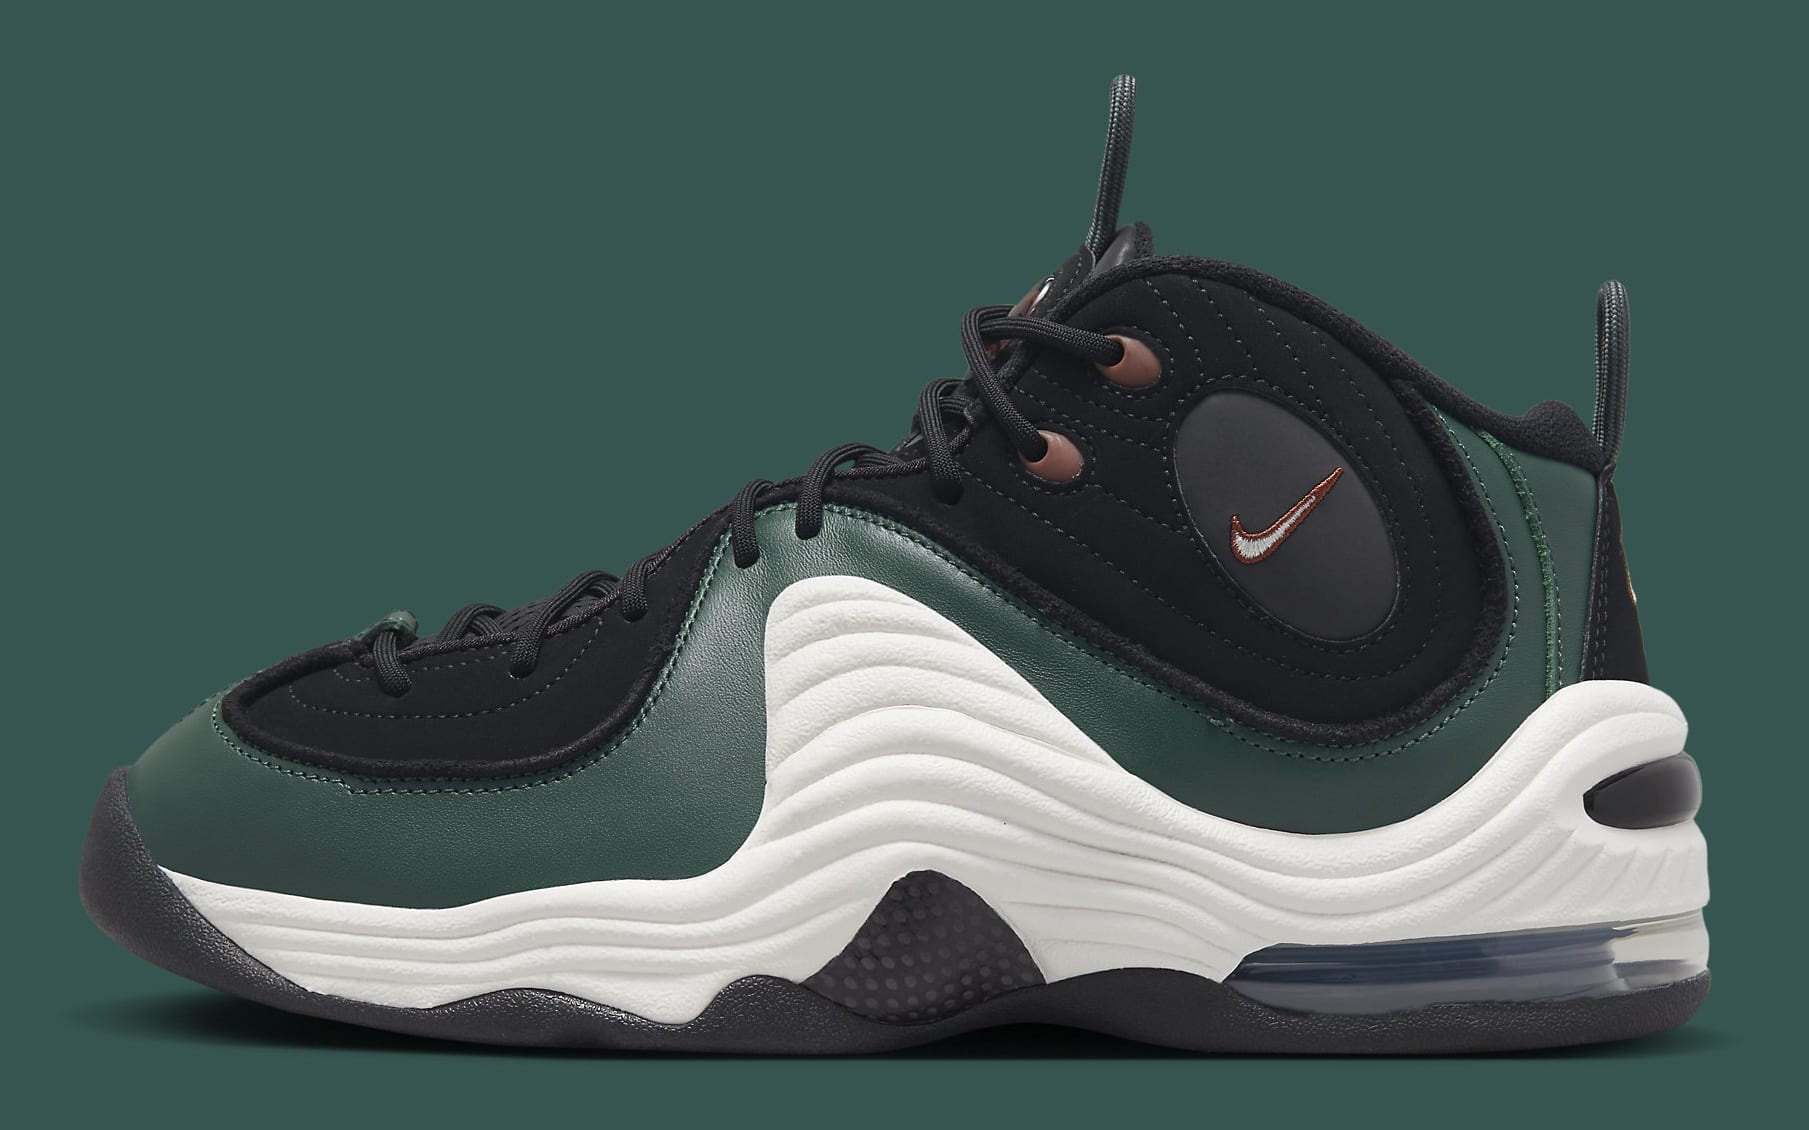 Nike Air Penny 2 Faded Spruce Release Date DV3465-001 | Sole Collector